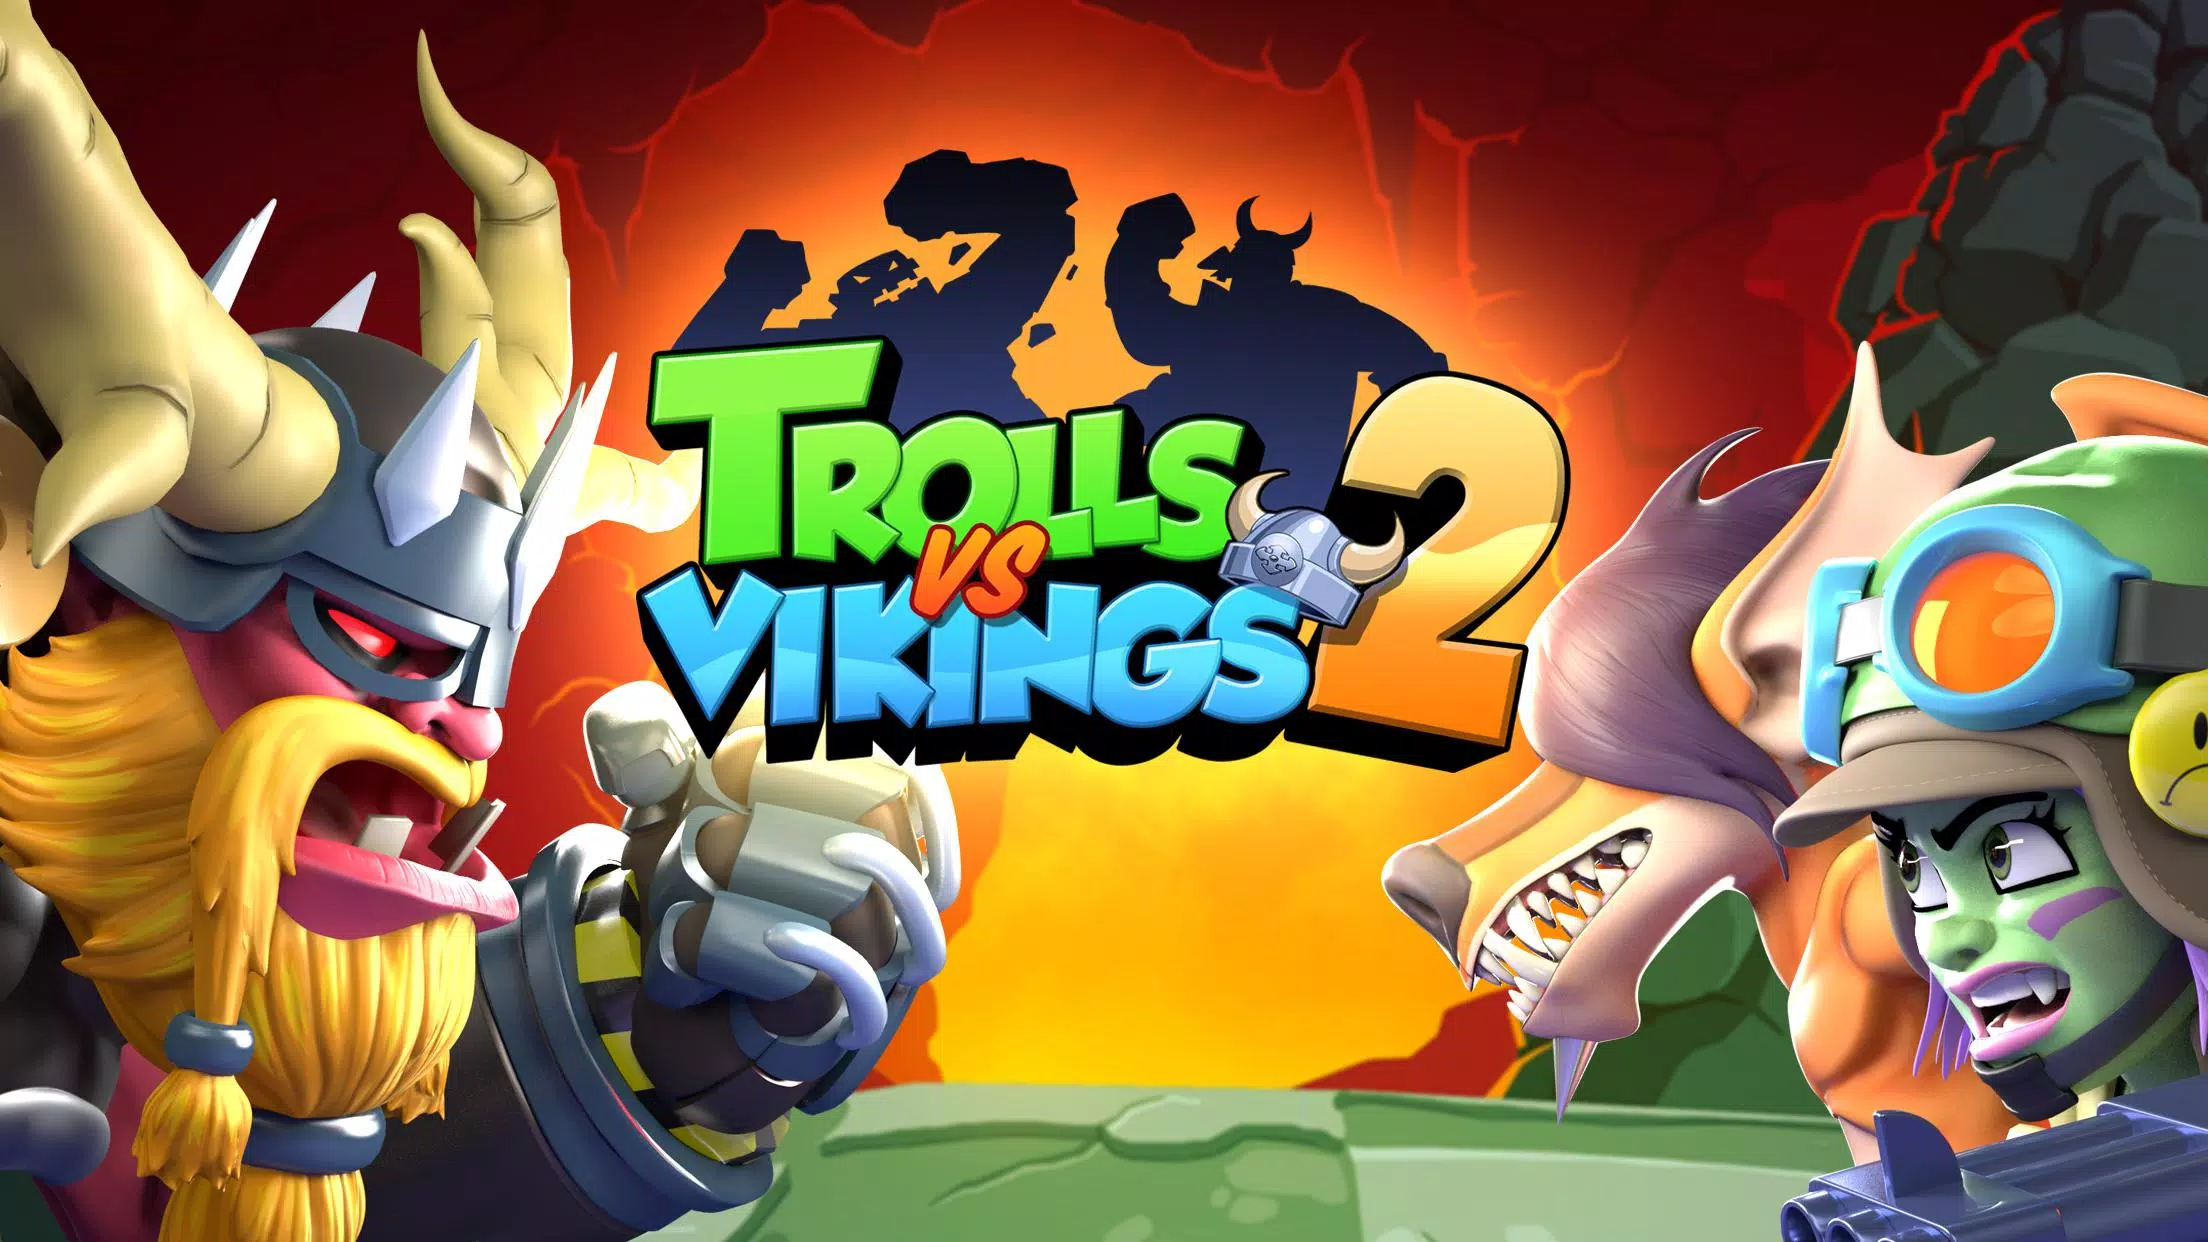 Trolls vs Vikings 2 for Android - APK Download